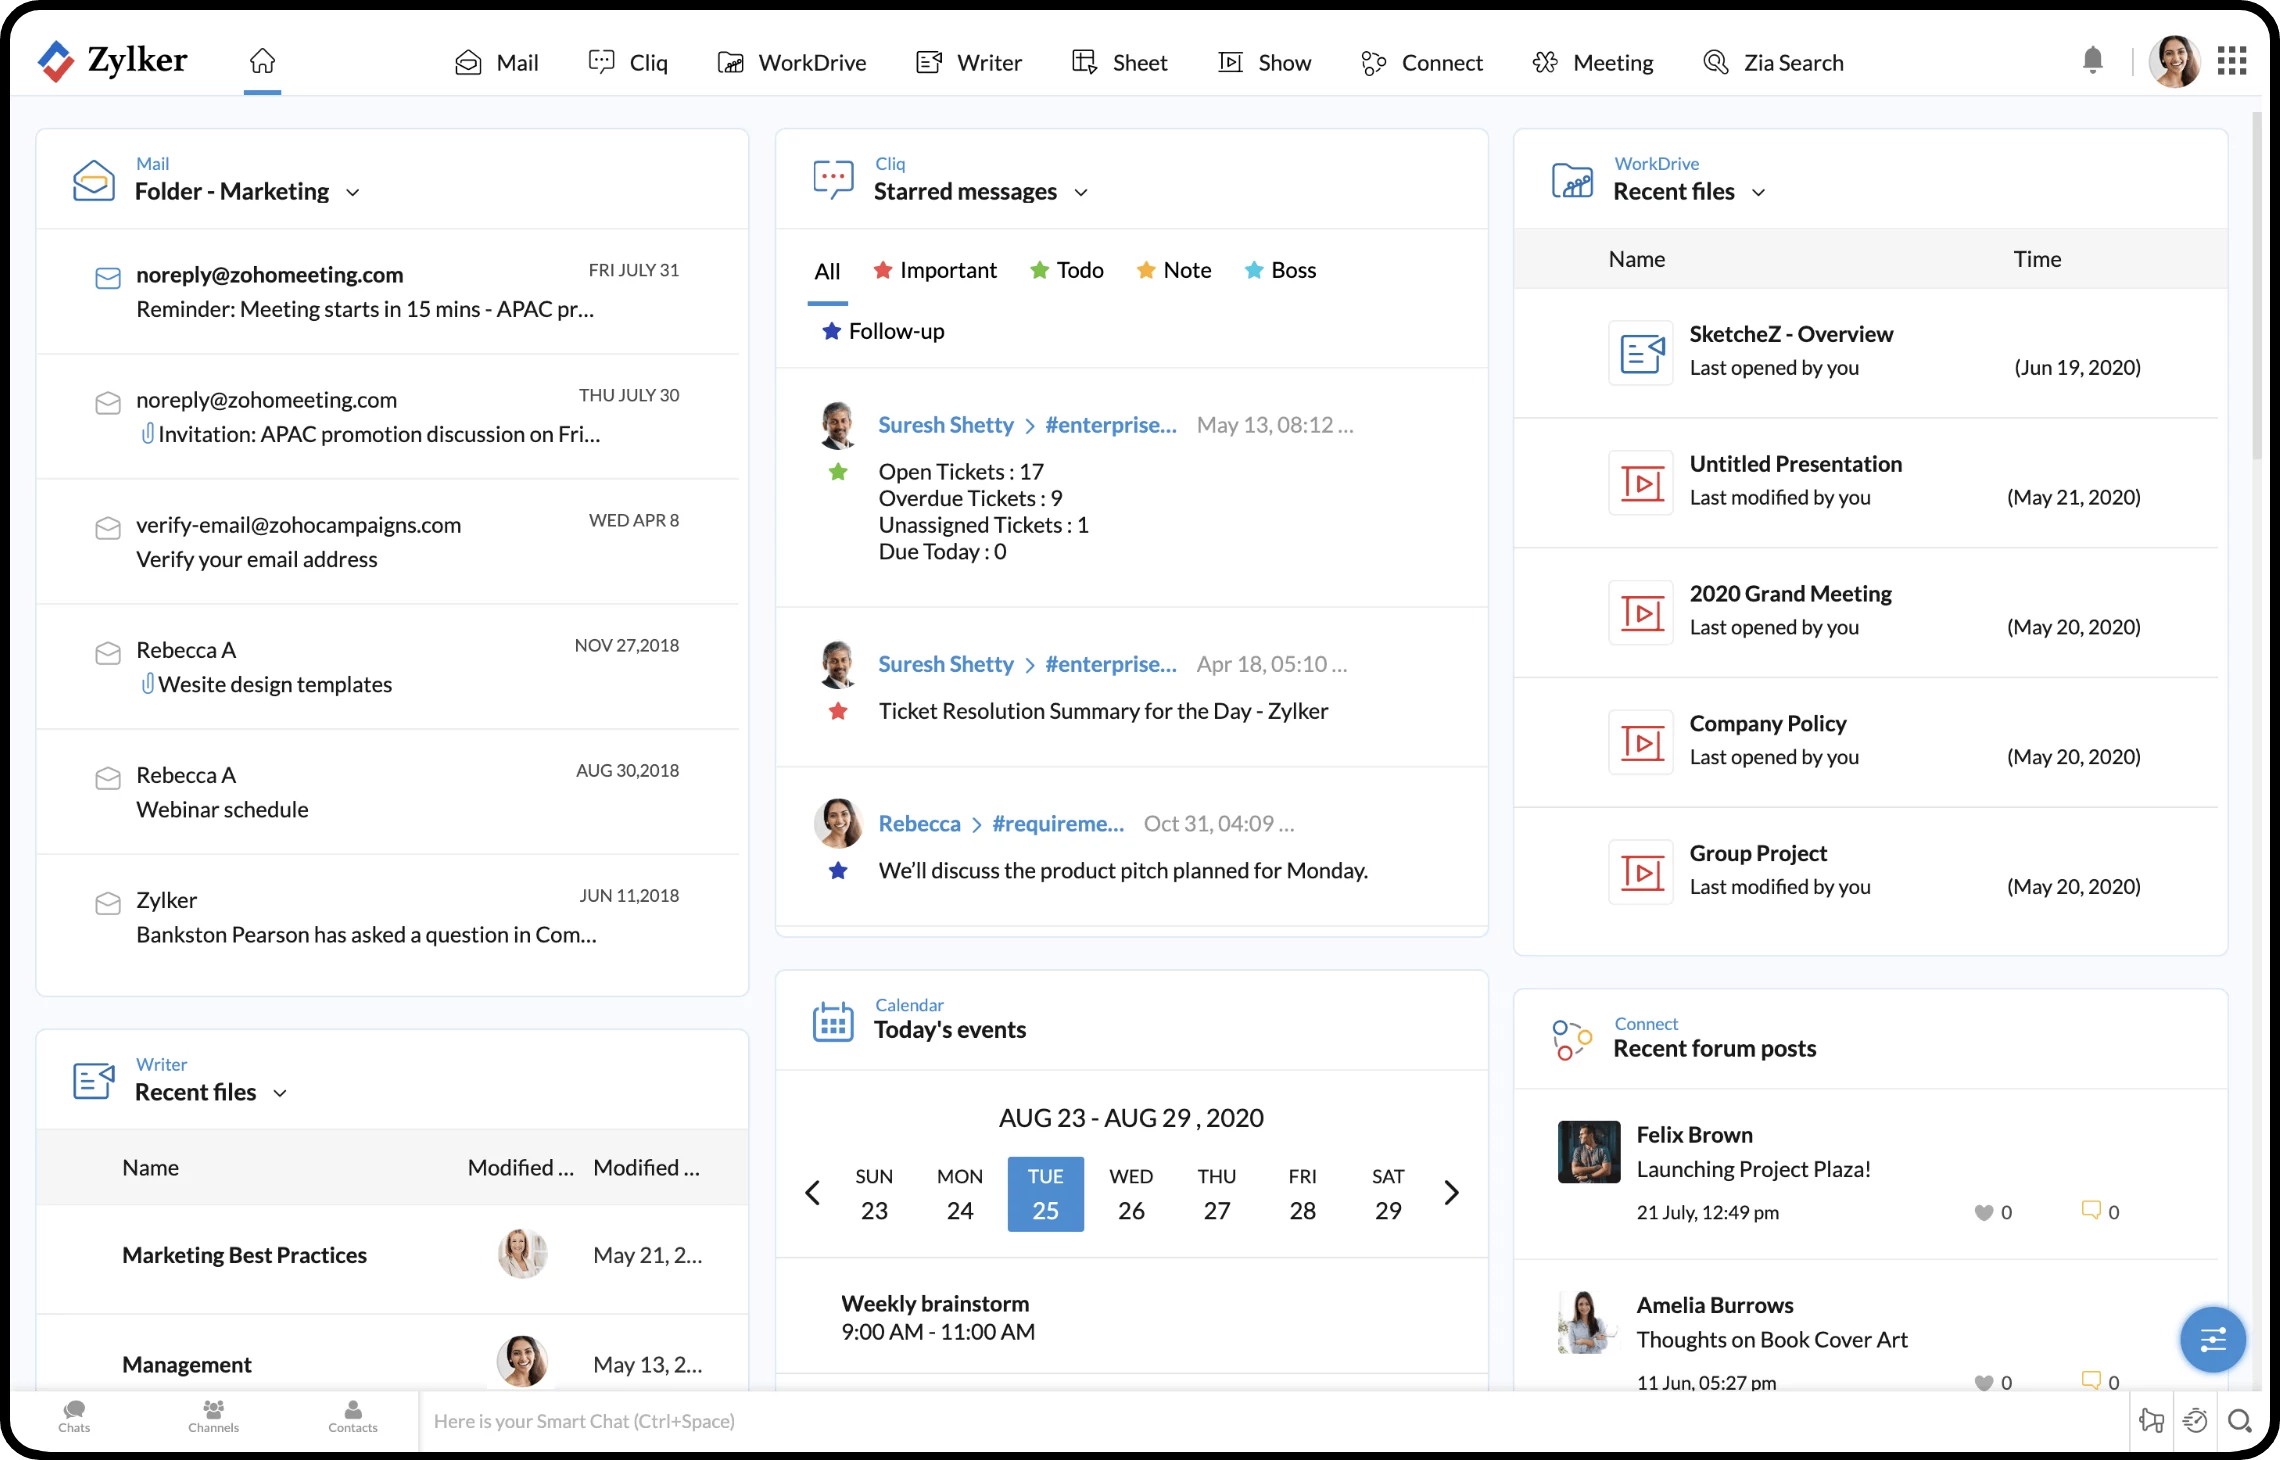 Zoho Mail - integriert in Zoho Workplace